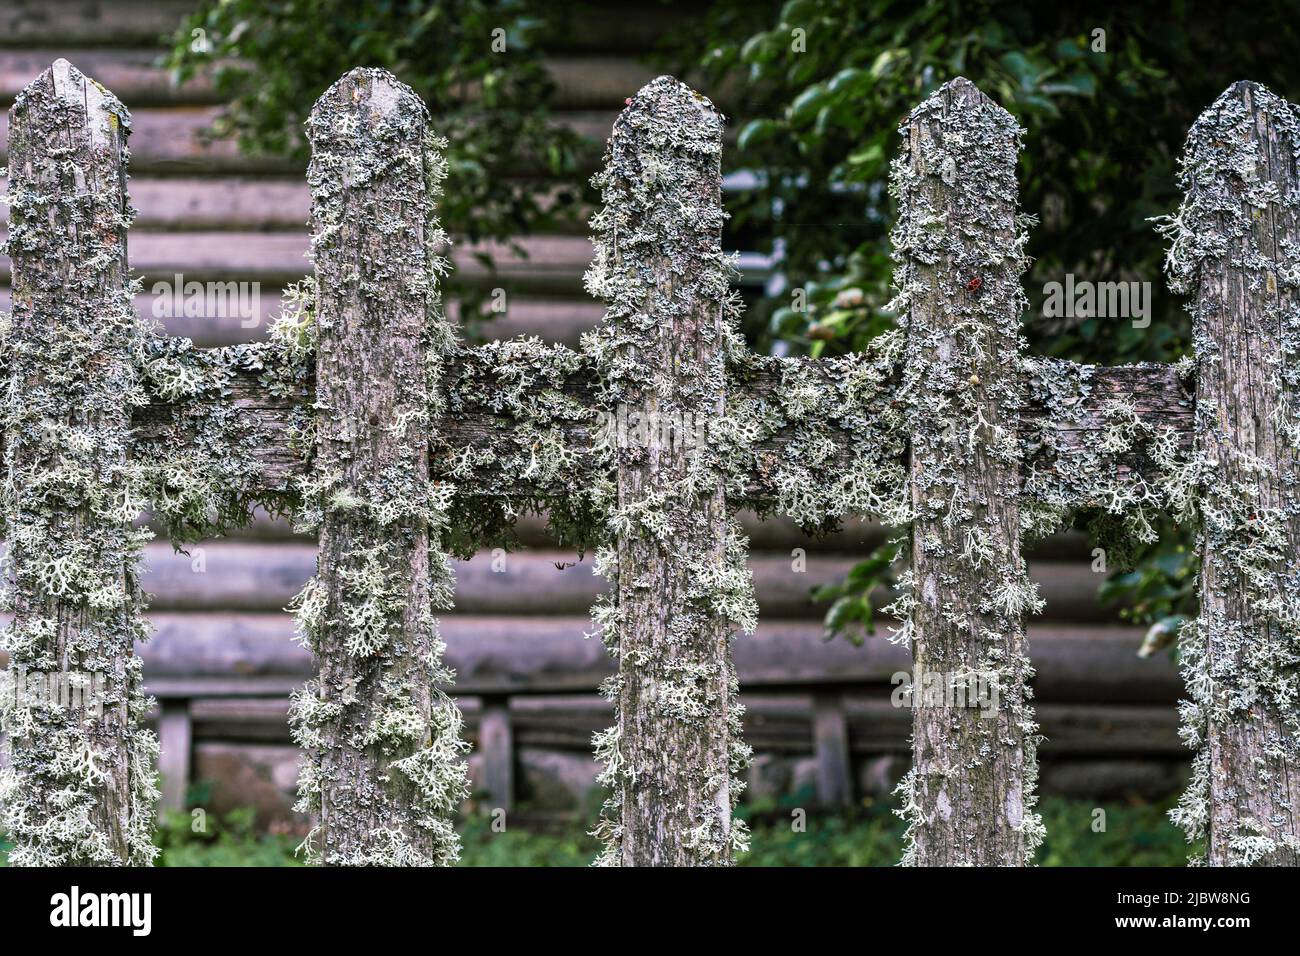 Fragment of an old wooden fence overgrown with moss and lichen. Stock Photo